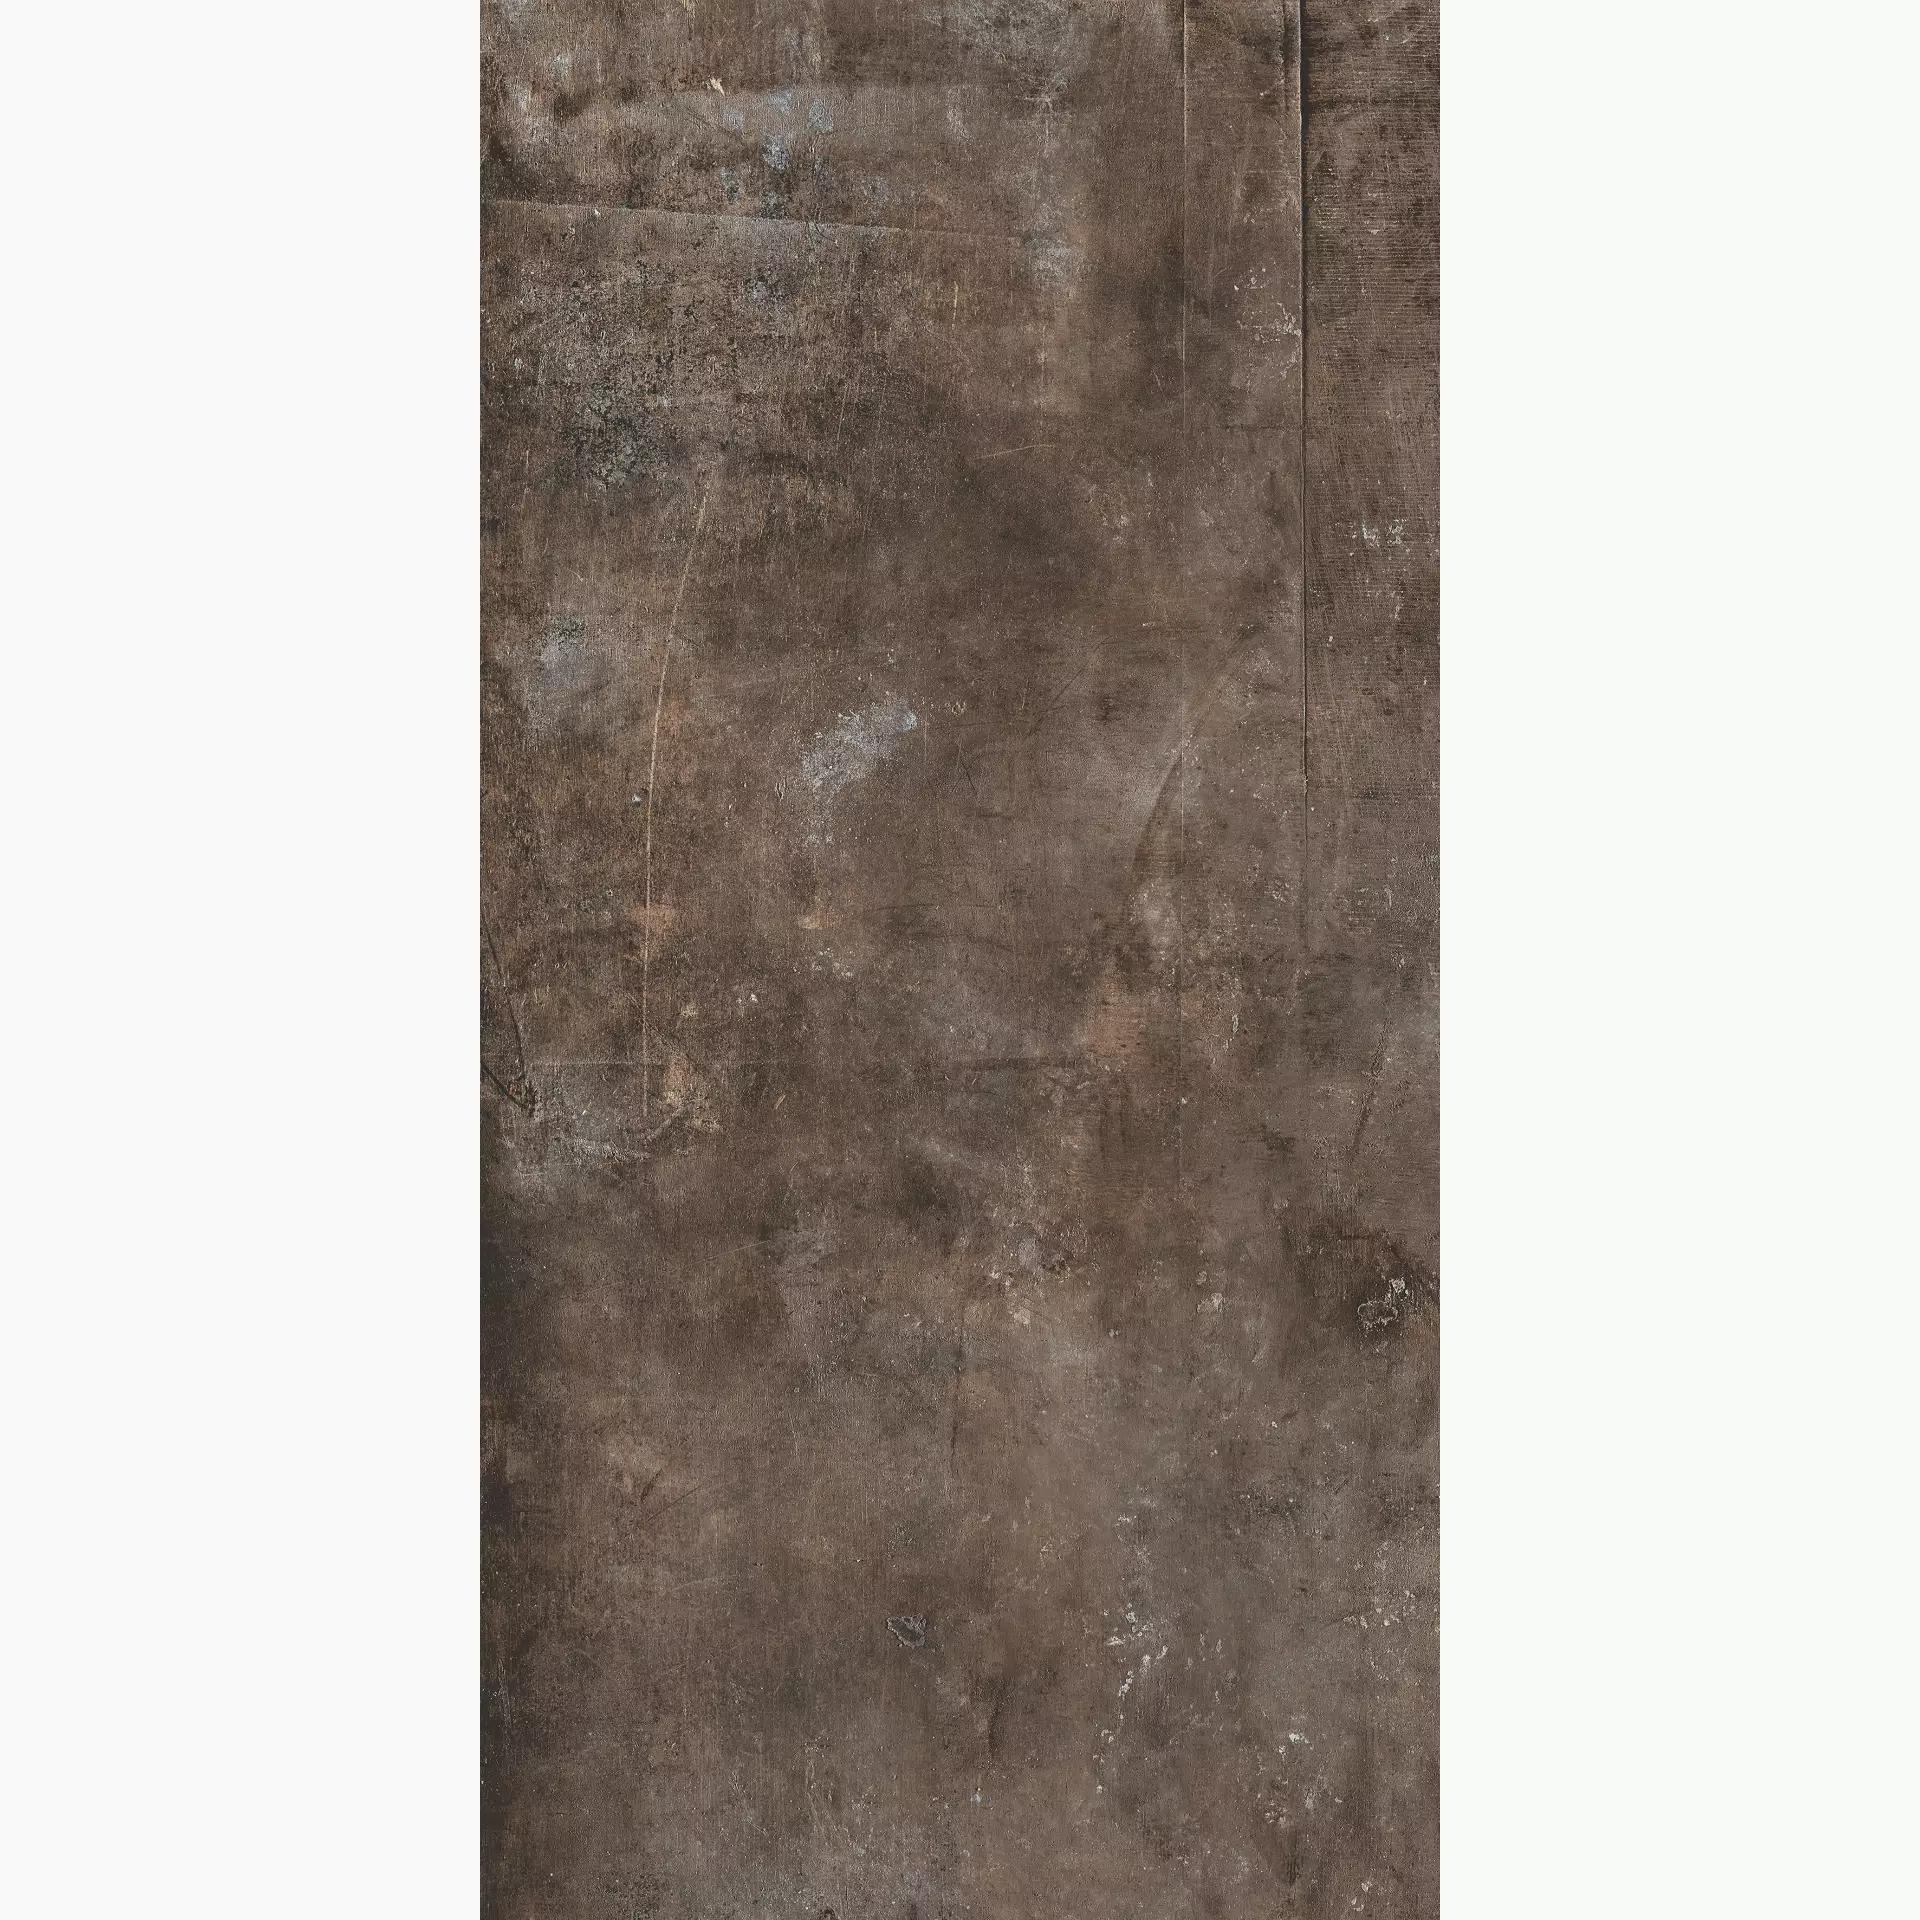 Refin Plant Copper Naturale LY17 45x90cm rectified 9mm